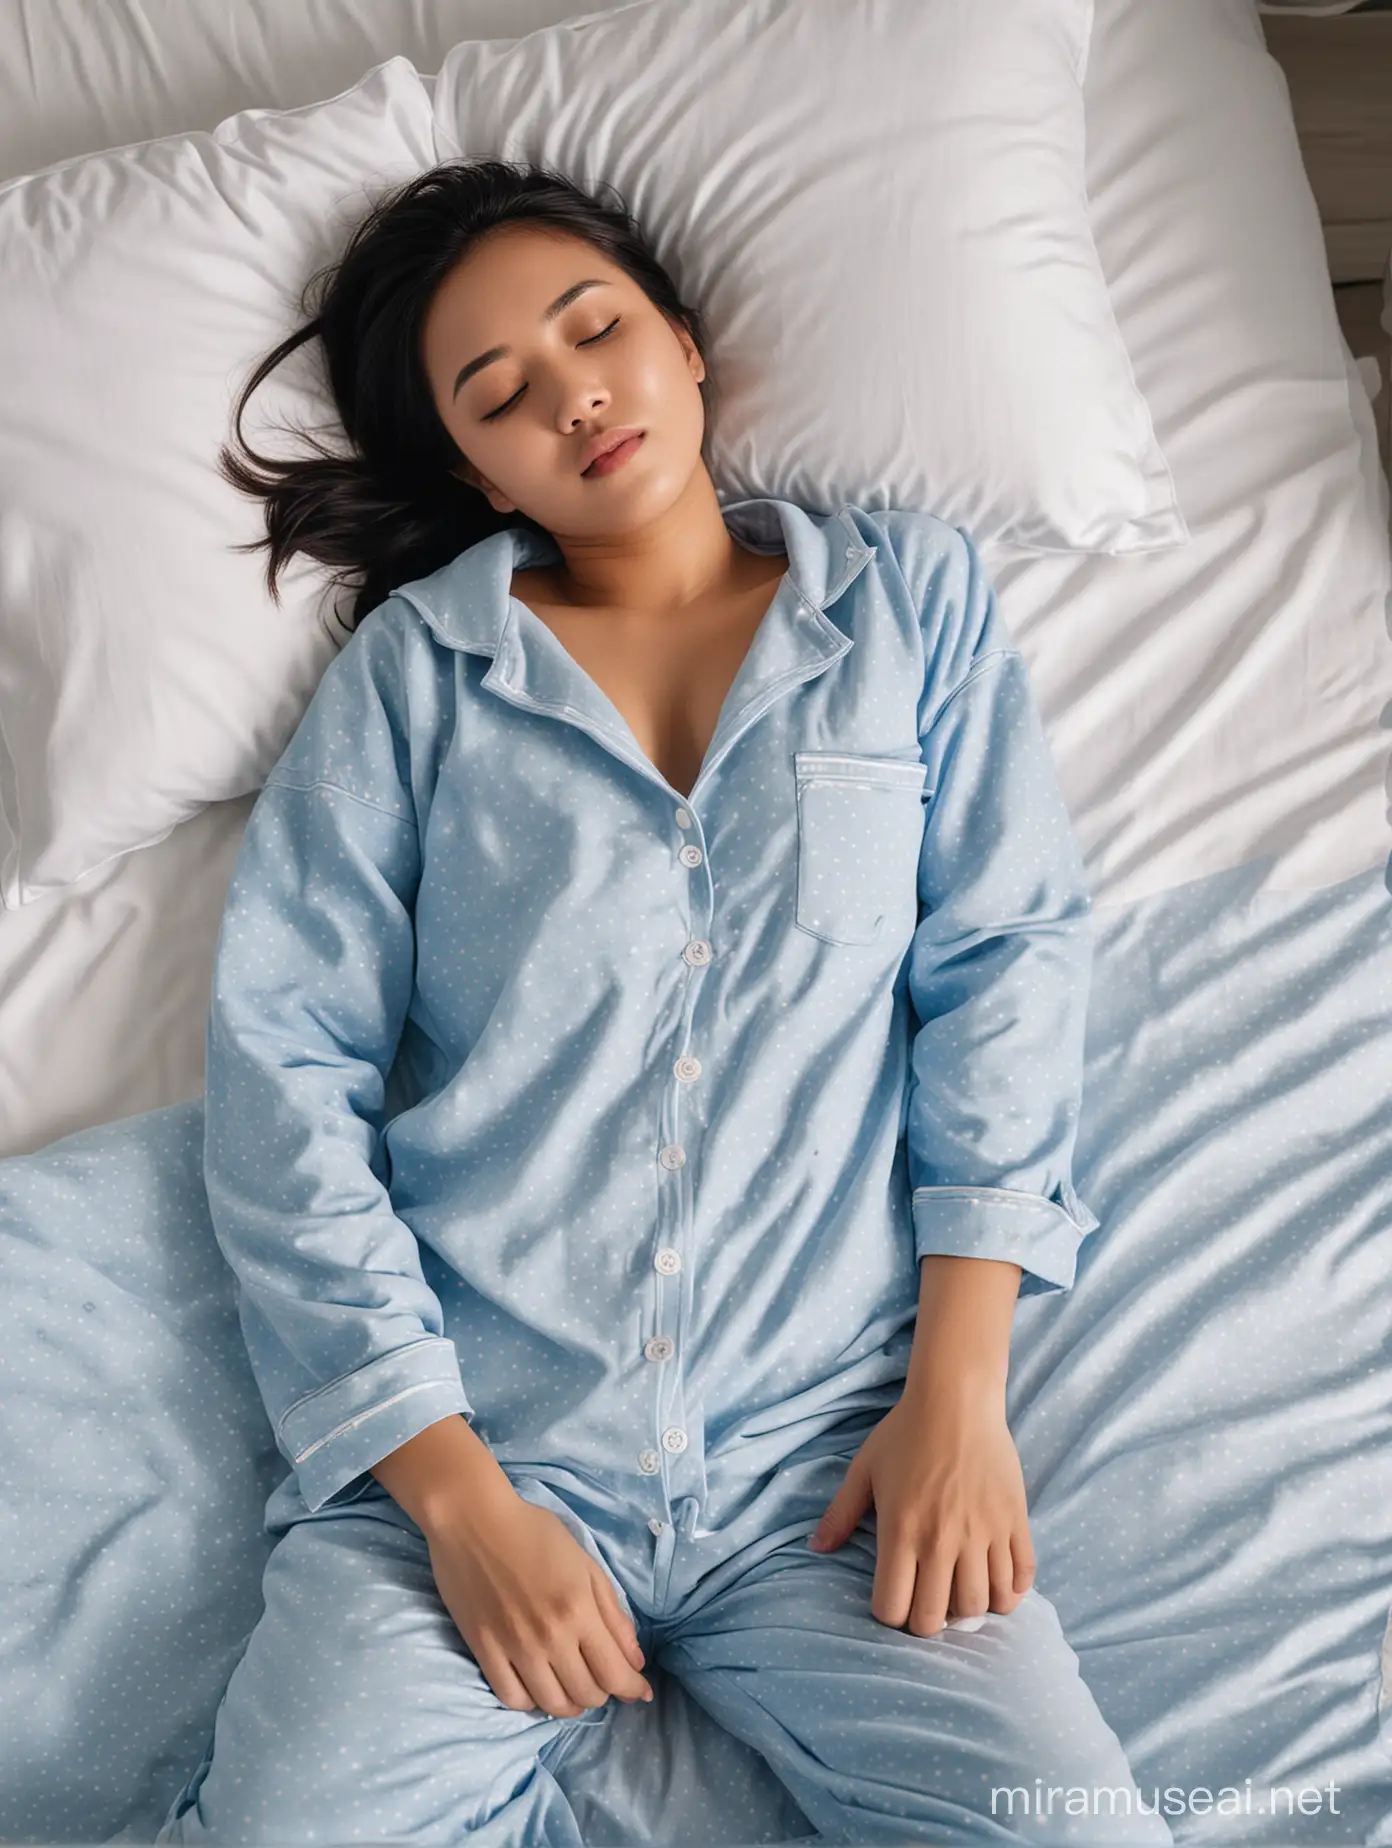 Relaxed Filipino Woman in Blue Pajamas Resting on Bed